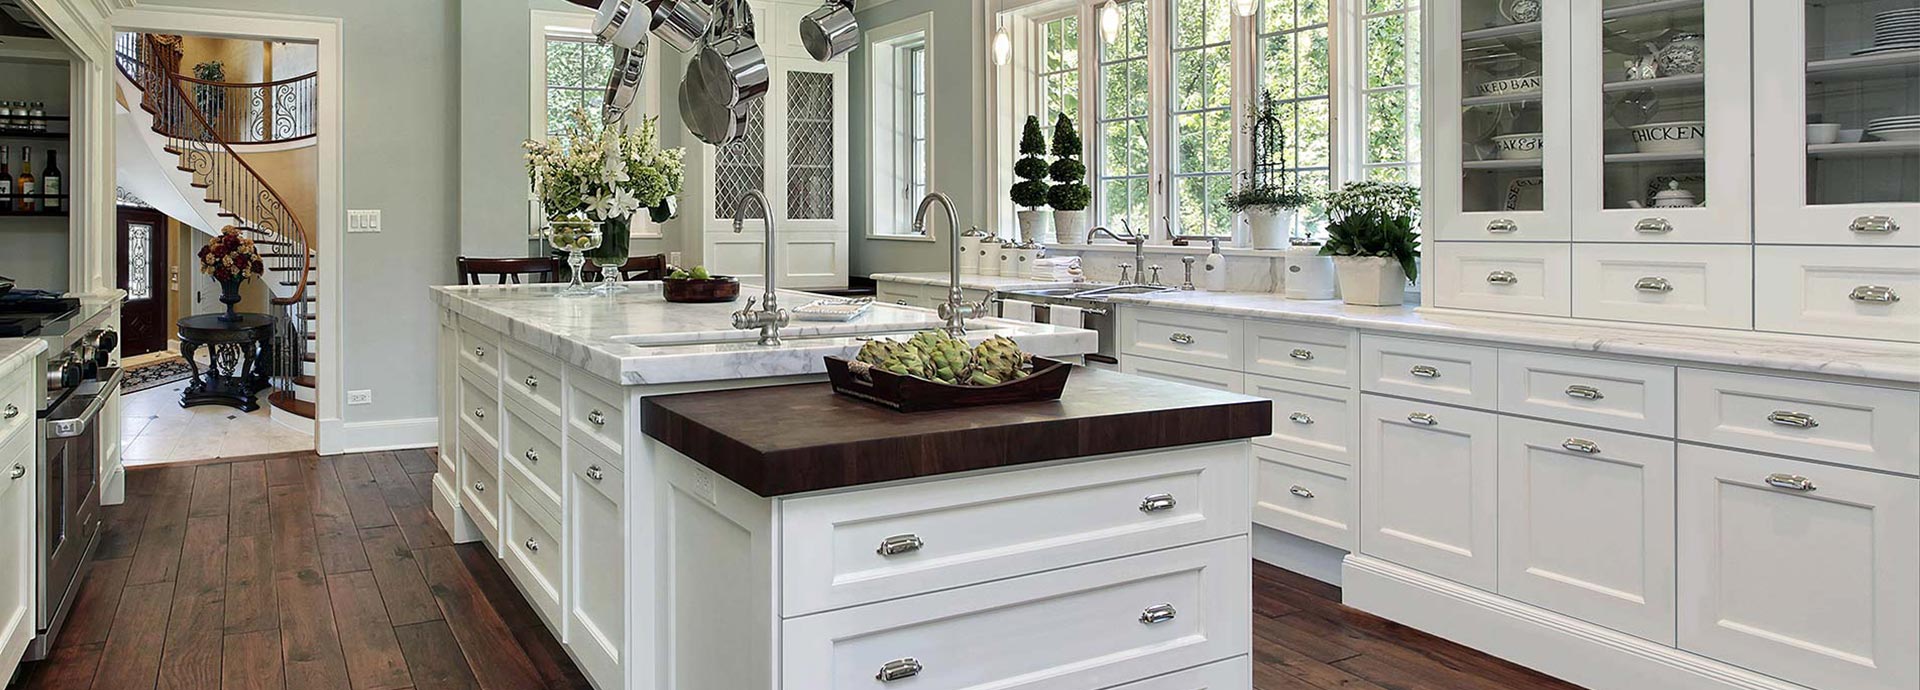 Discount Kitchen Cabinets Online RTA Cabinets At Wholesale Prices